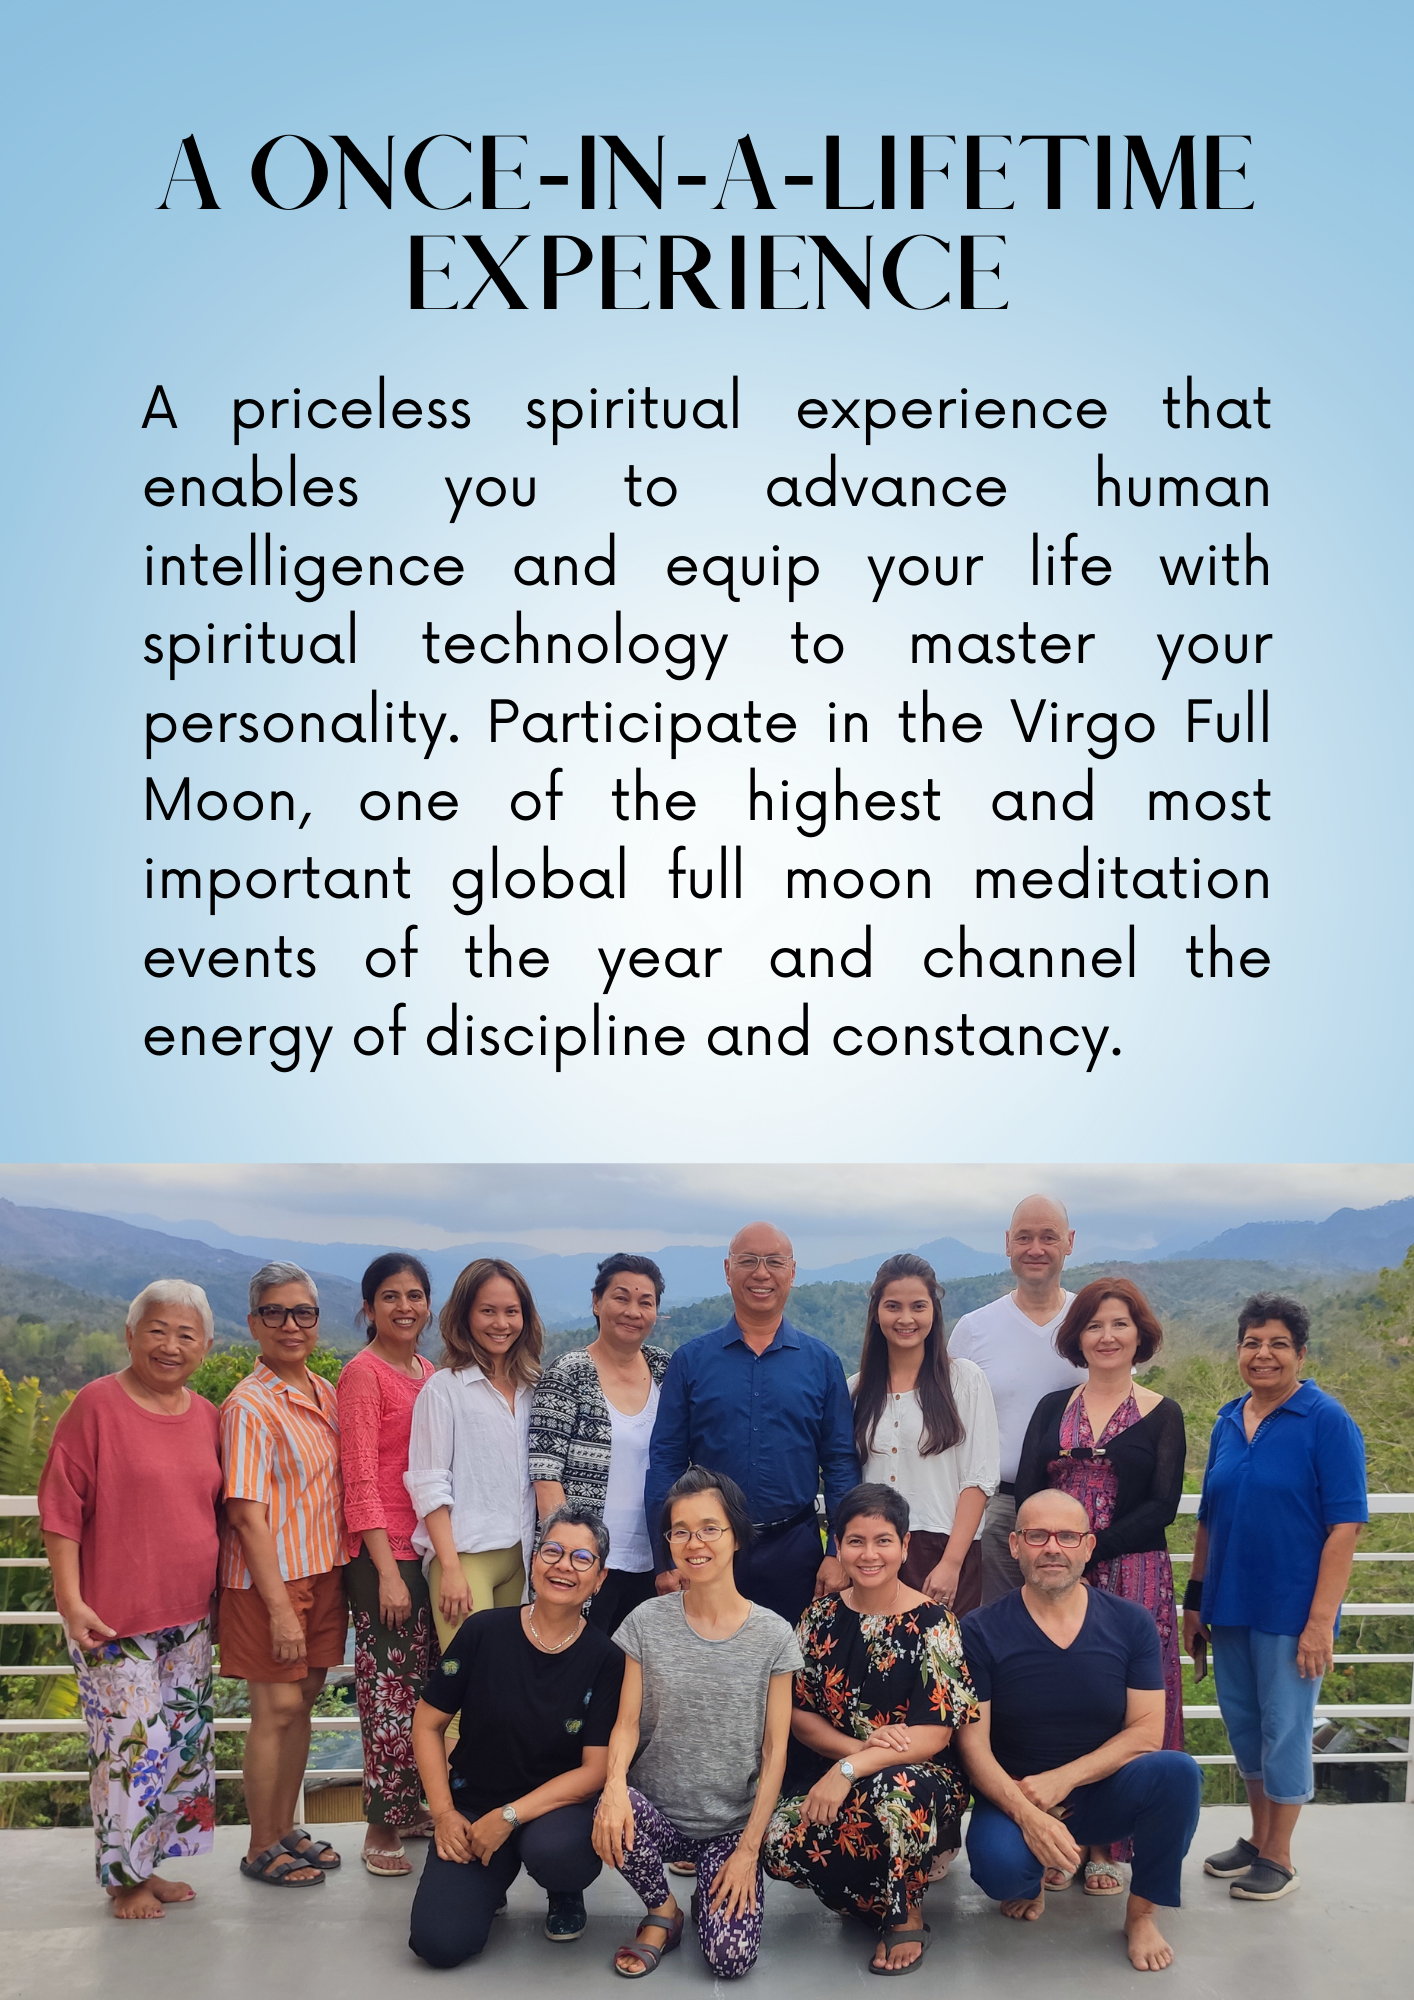 The Third Eye Initiation Retreat - Jan 16 to 25, 2024 (In-Person)